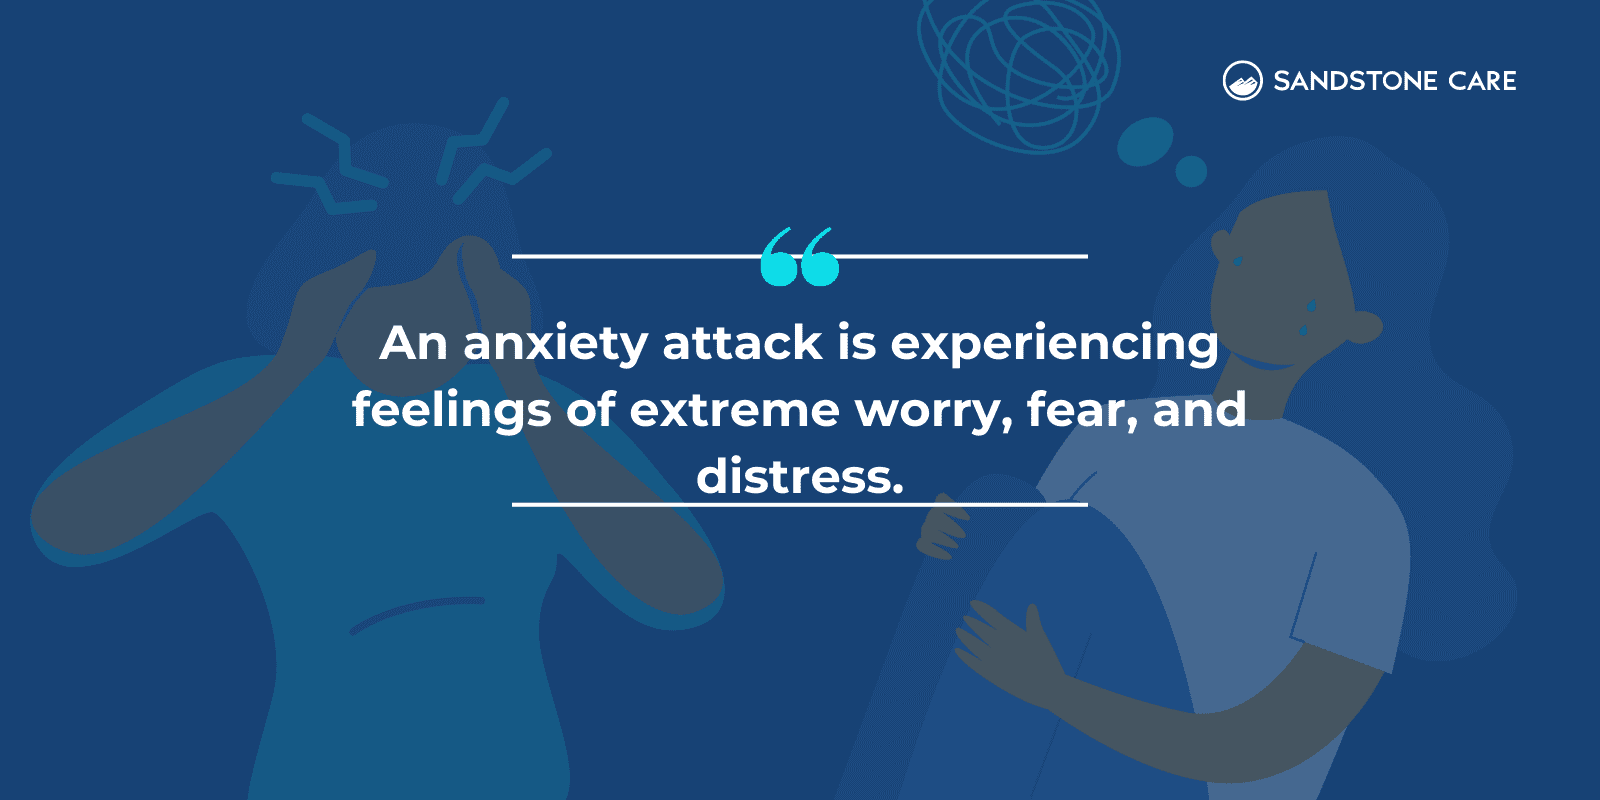 "An anxiety attack is experiencing feelings of extreme worry, fear, and distress." written above the background depicting people experiencing anxiety attack